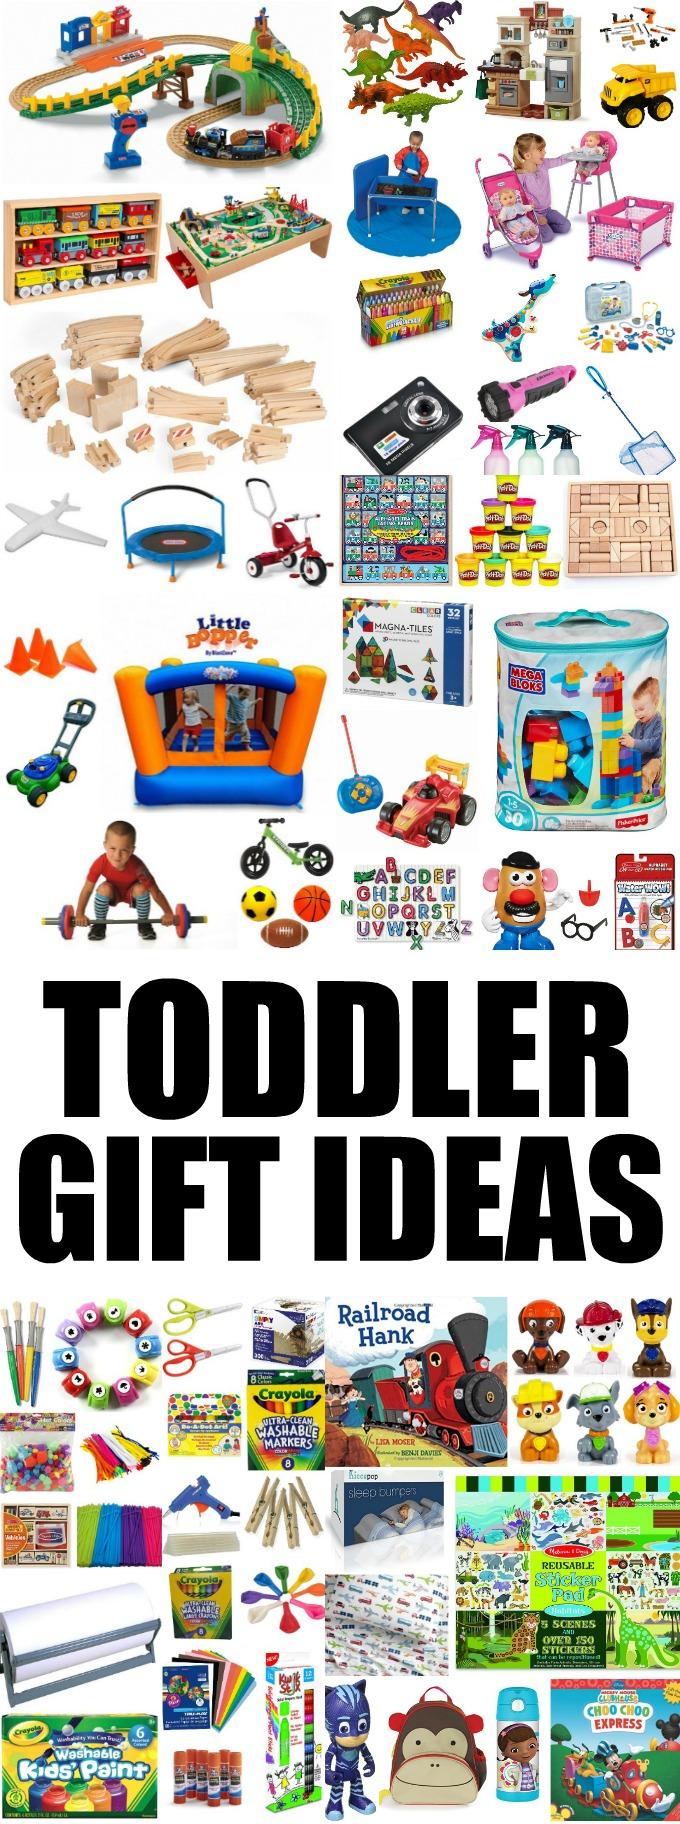 These Toddler Gift Ideas make perfect birthday presents, Christmas gifts or everyday surprises. Grab one for your son or daughter or one of their friends!